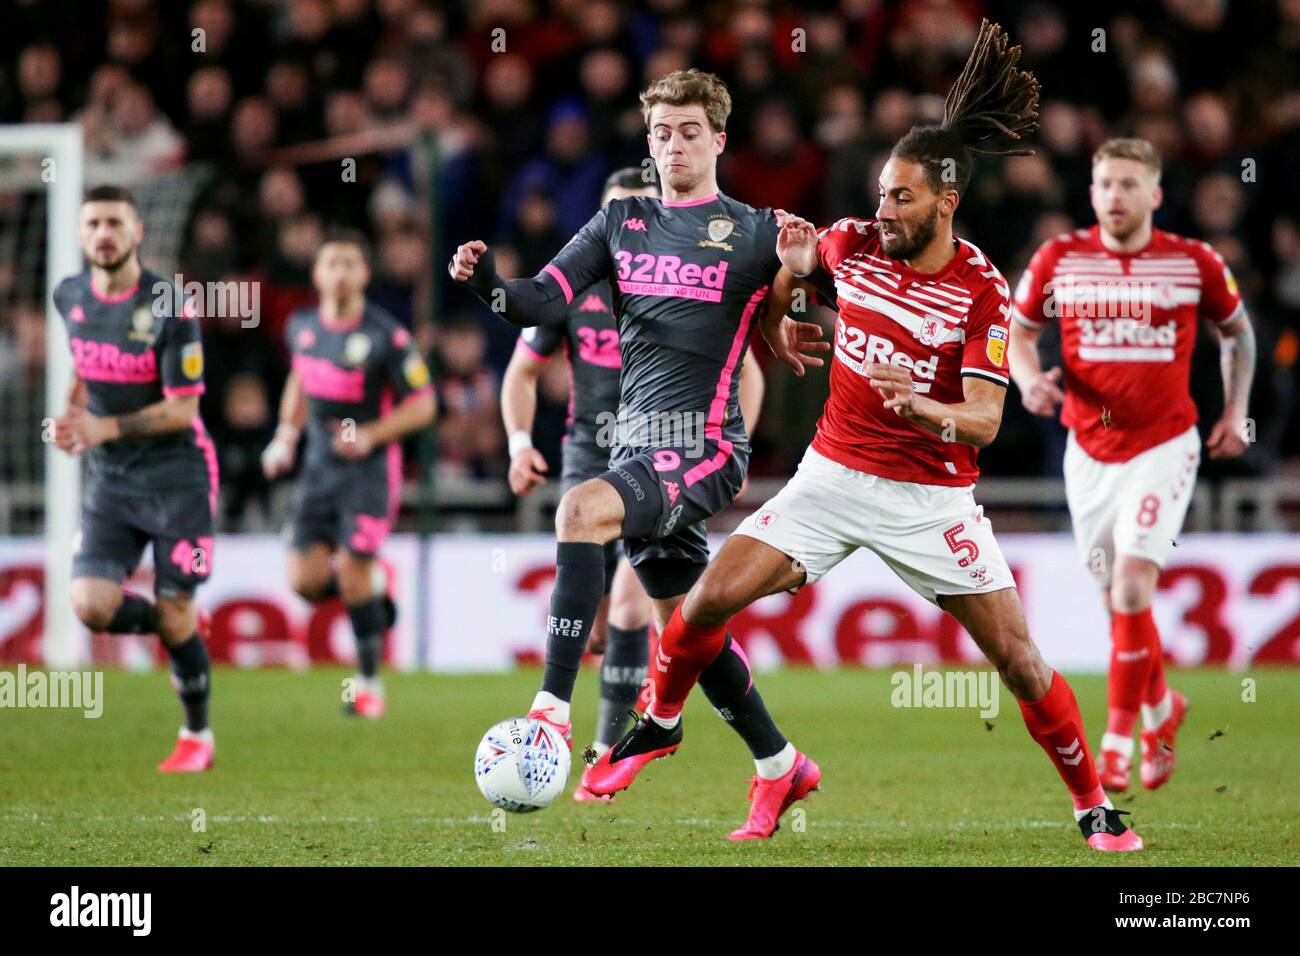 Ryan Shotton of Middlesbrough and Patrick Bamford of Leeds United in action - Middlesbrough v Leeds United, Sky Bet Championship, Riverside Stadium, Middlesbrough, UK - 26th February 2020  Editorial Use Only - DataCo restrictions apply Stock Photo